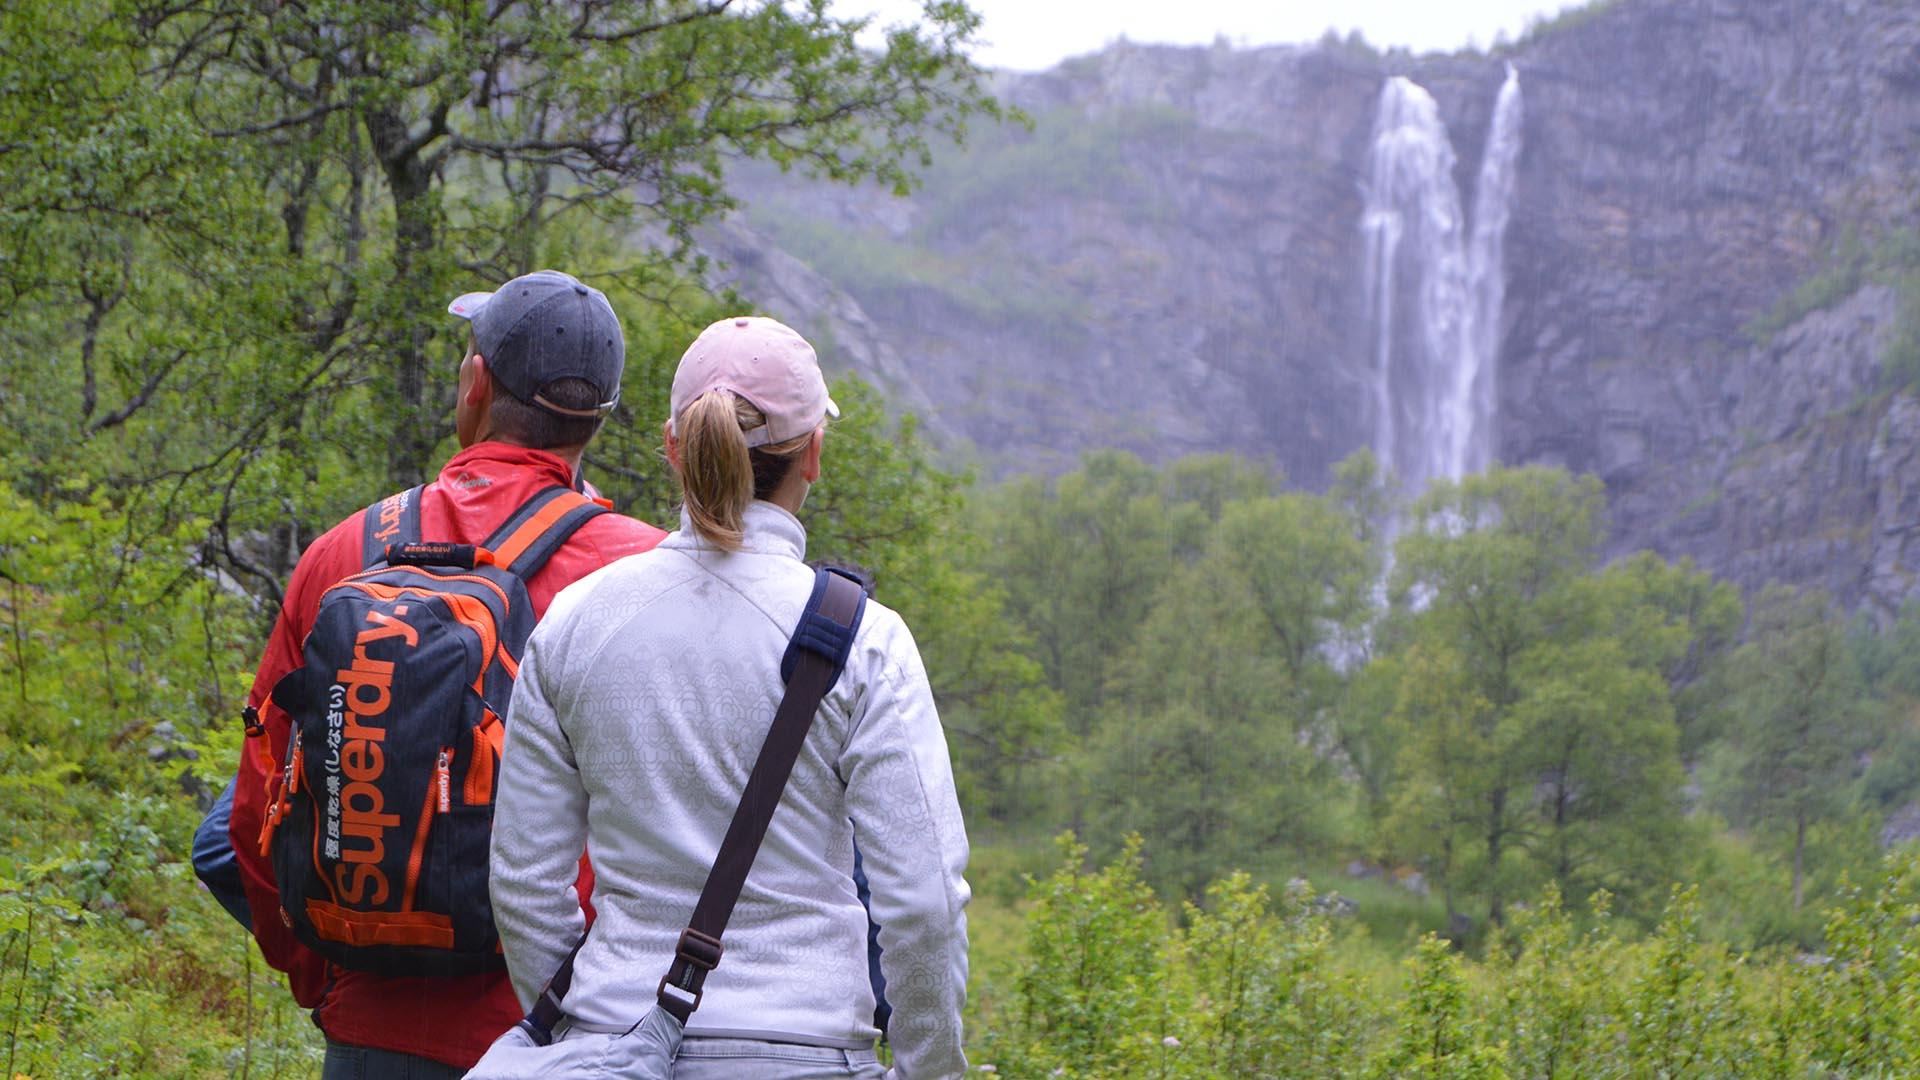 Two hikers are standing in a lush valley. In the background there is a rock cliff from which a waterfall plunges.